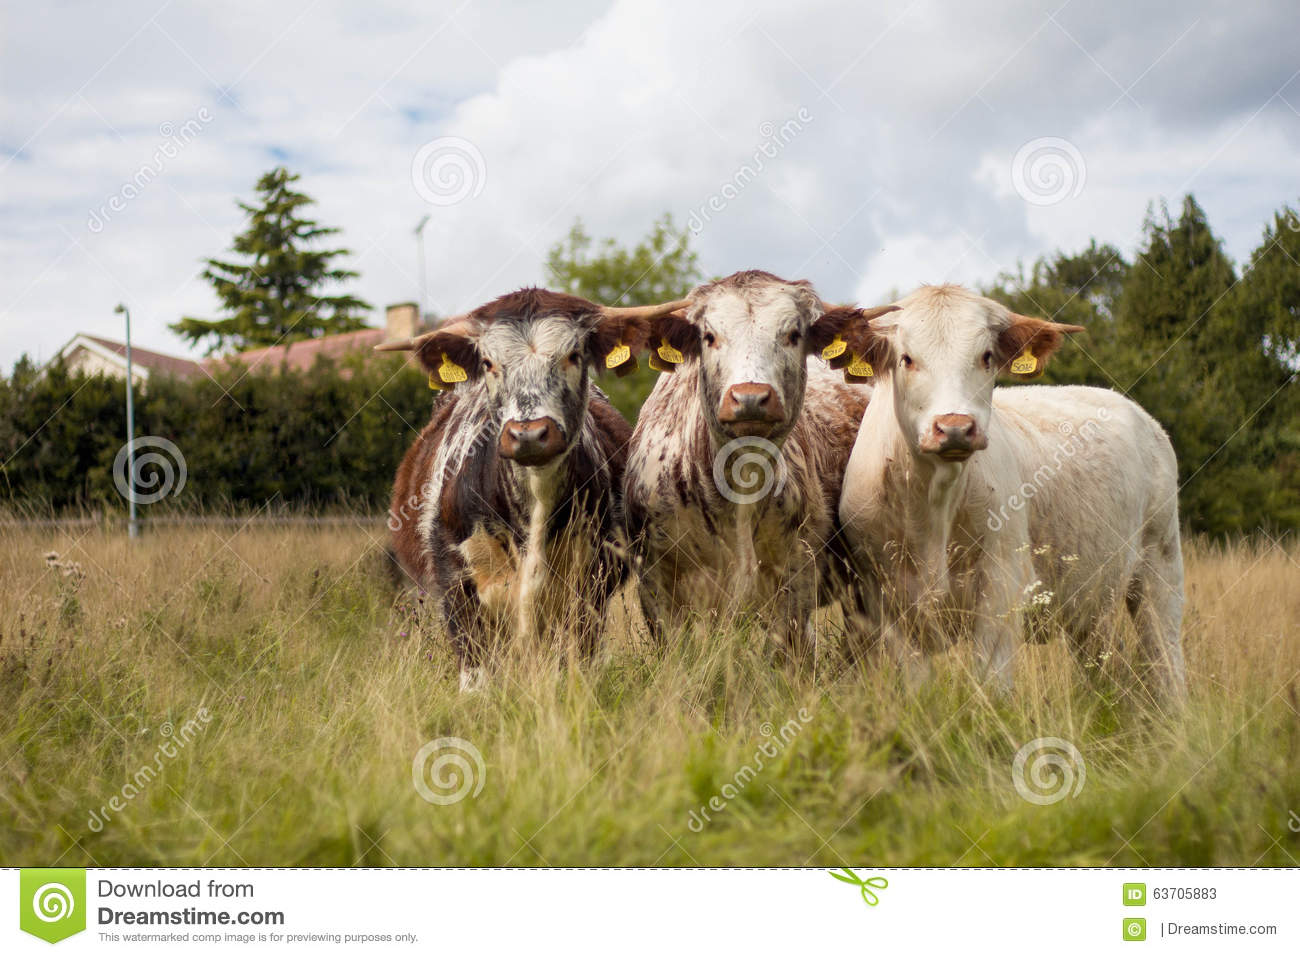 Shorthorn Cows Staring At Me In A Group Of 3 